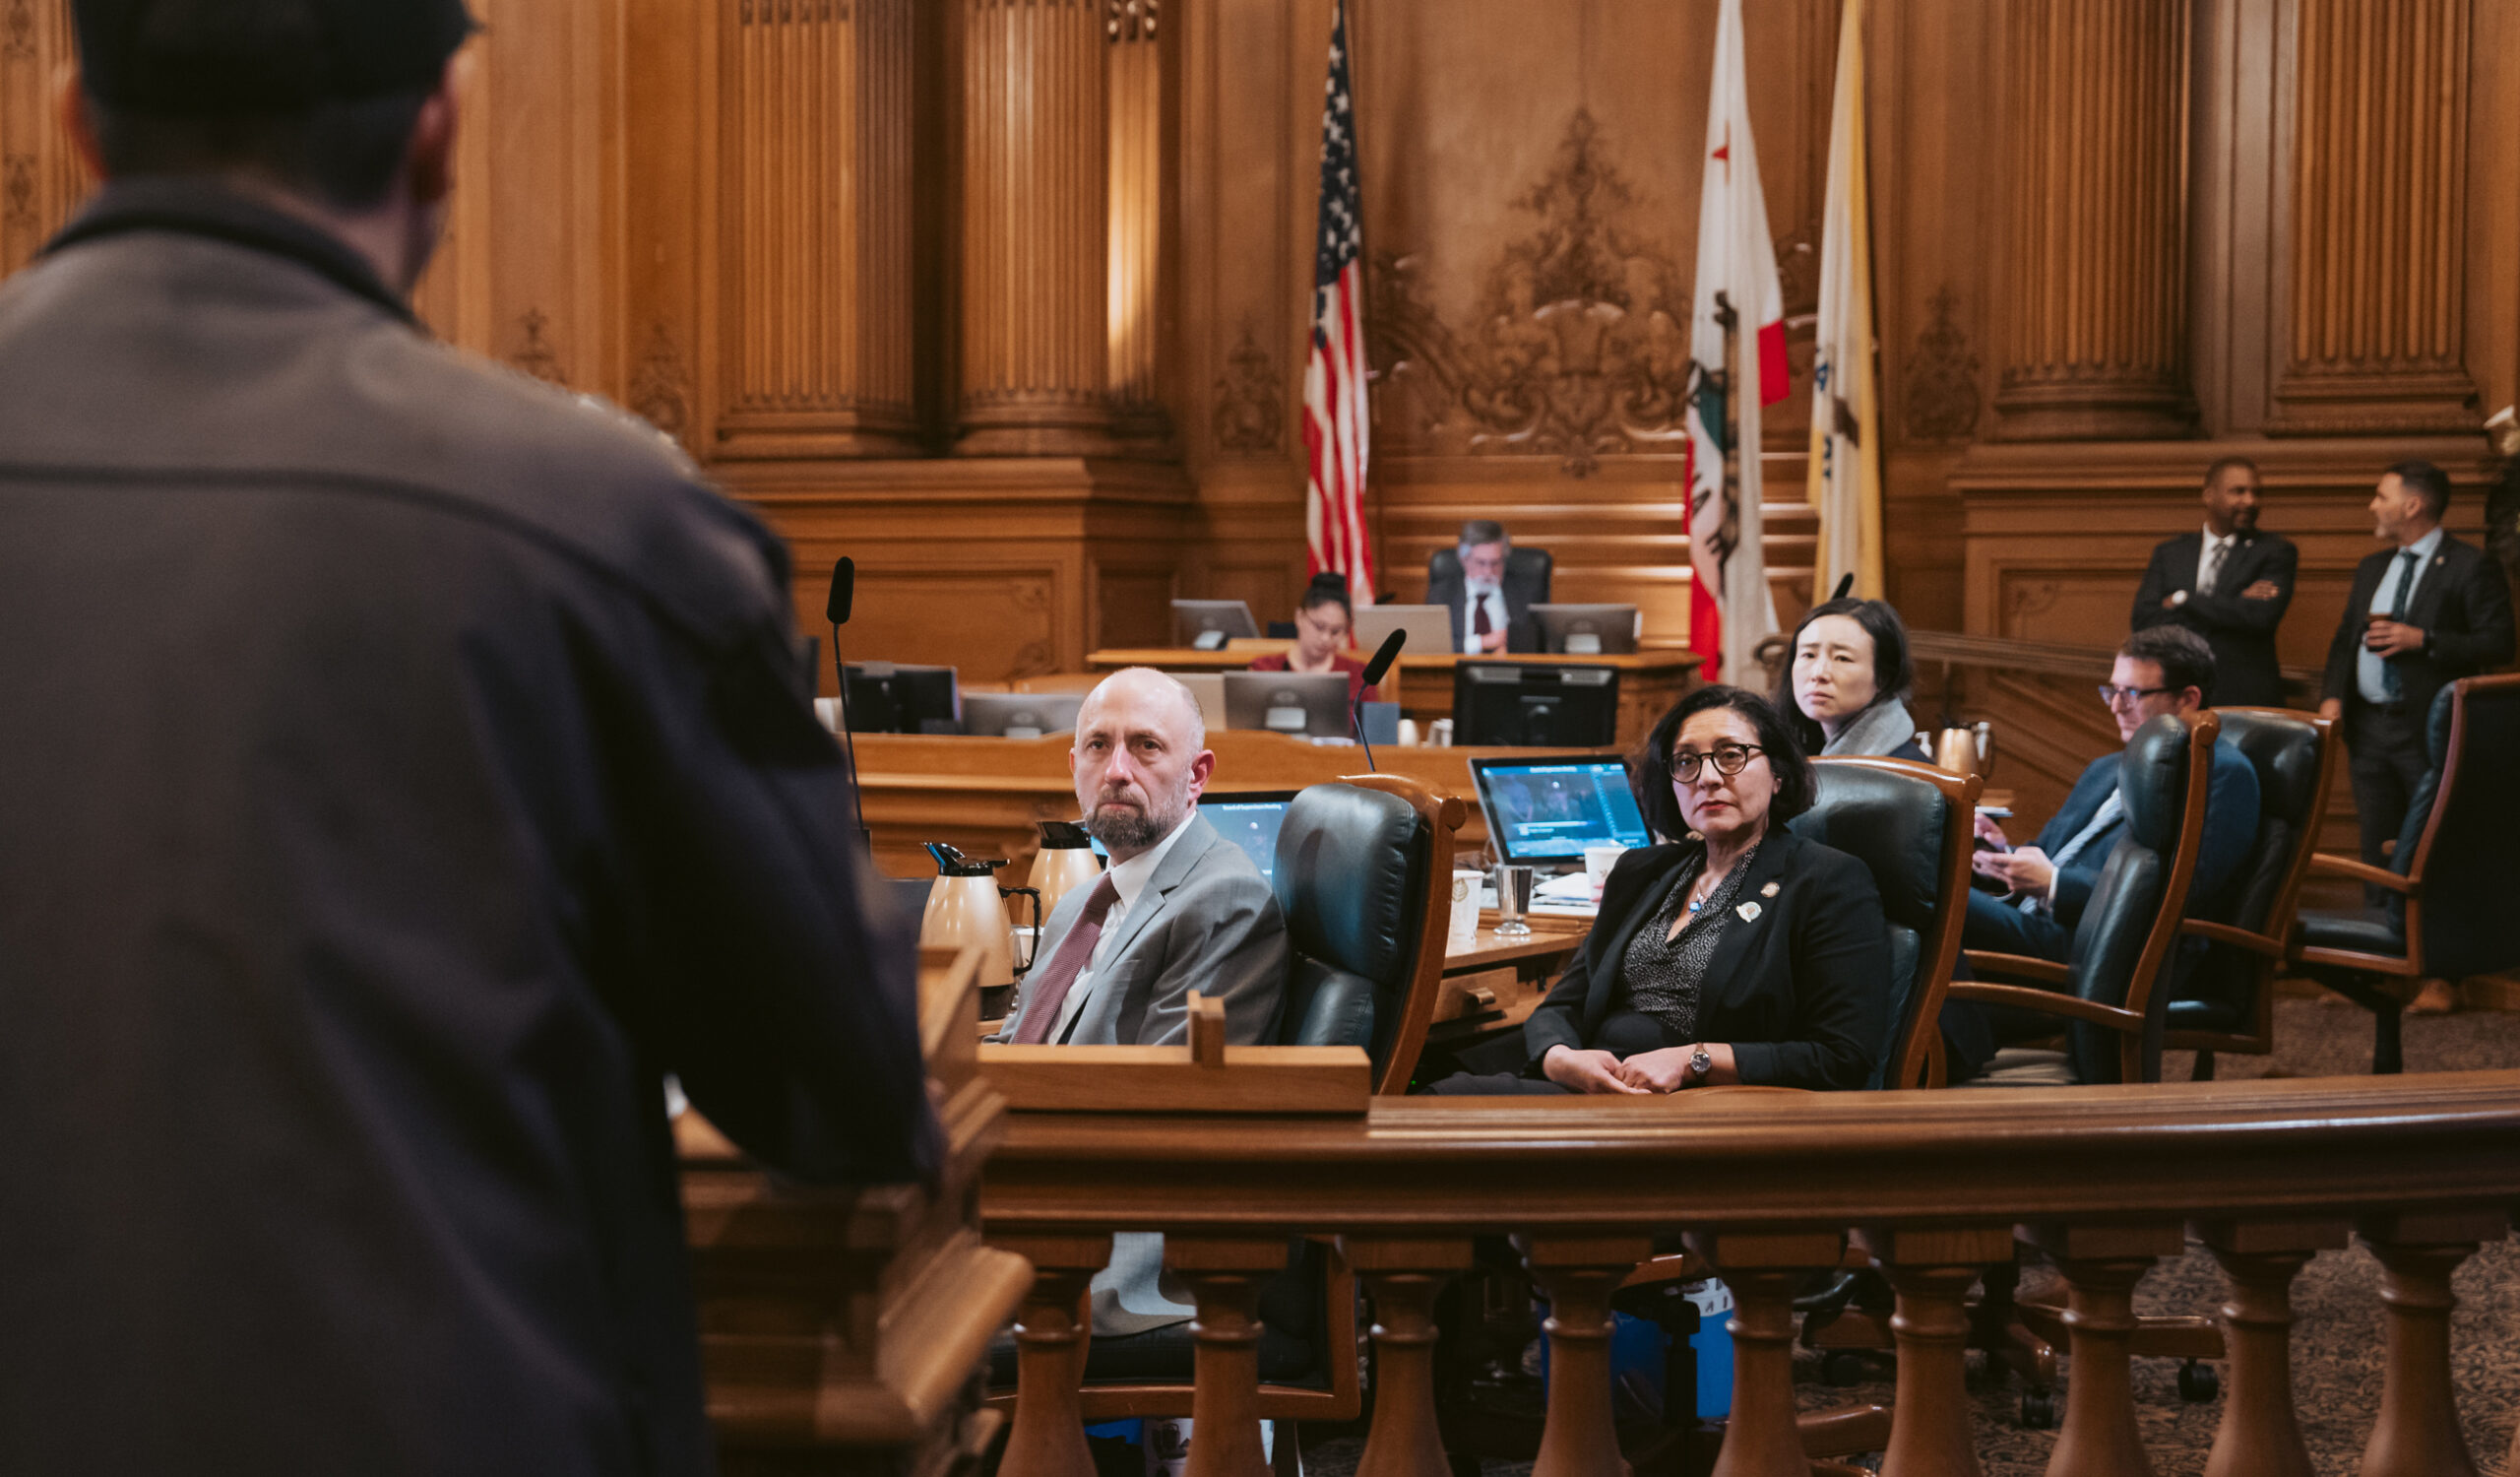 San Francisco Bans Most Remote Public Comment After Racist, Antisemitic Speech—for Now